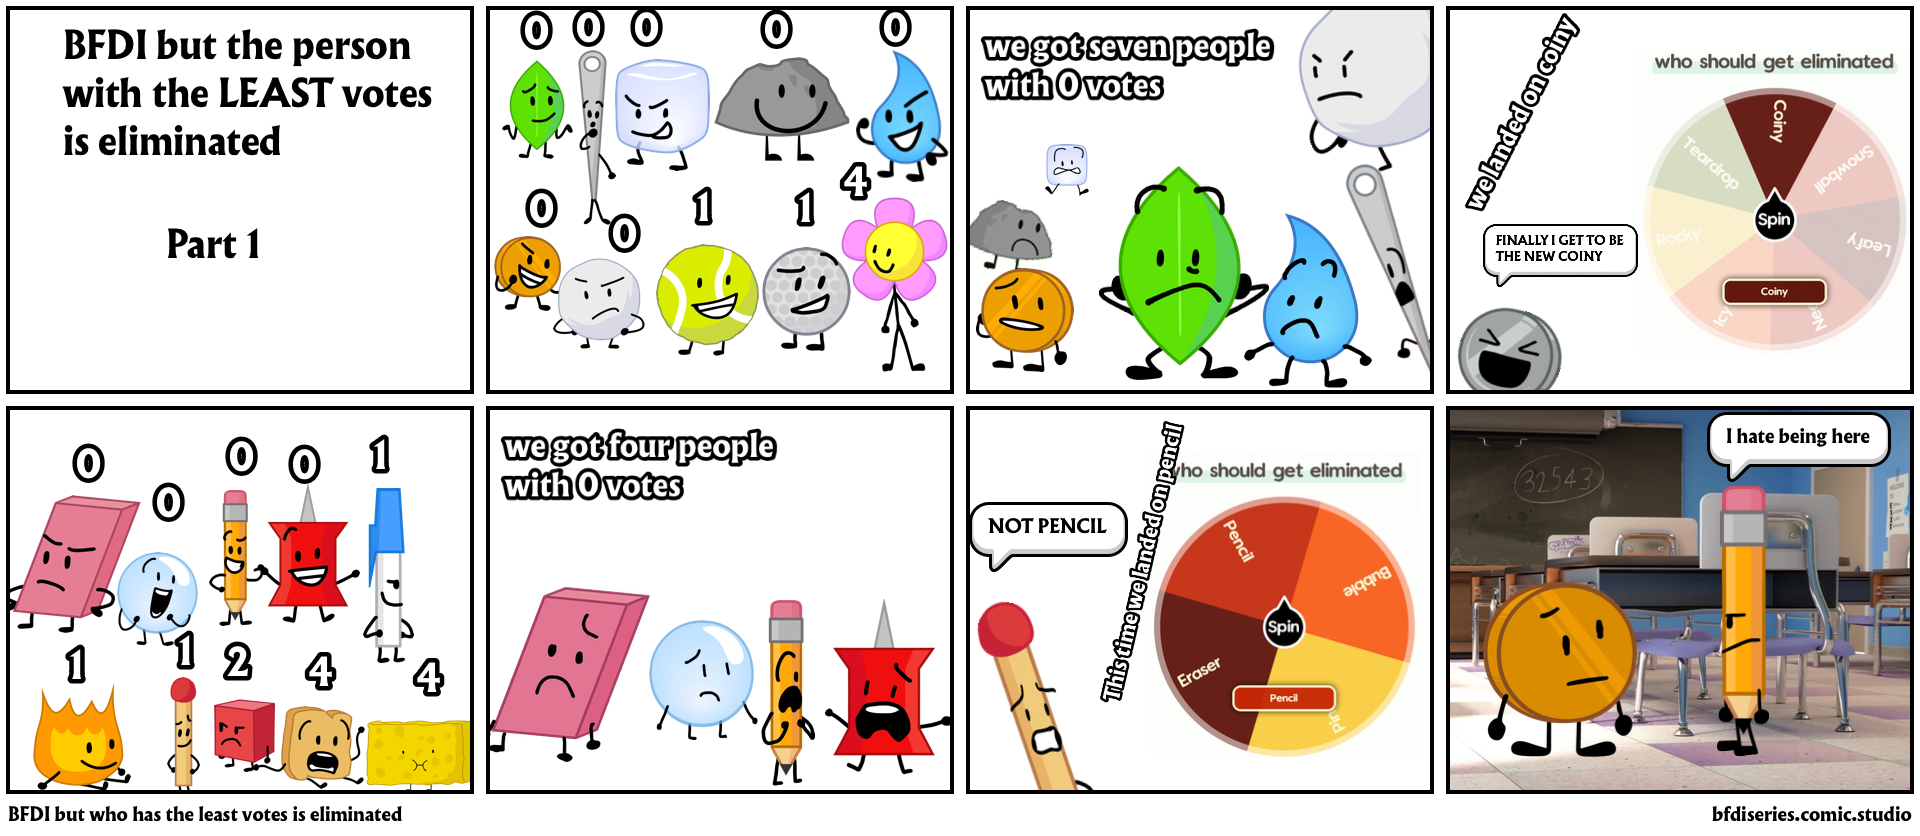 BFDI but who has the least votes is eliminated